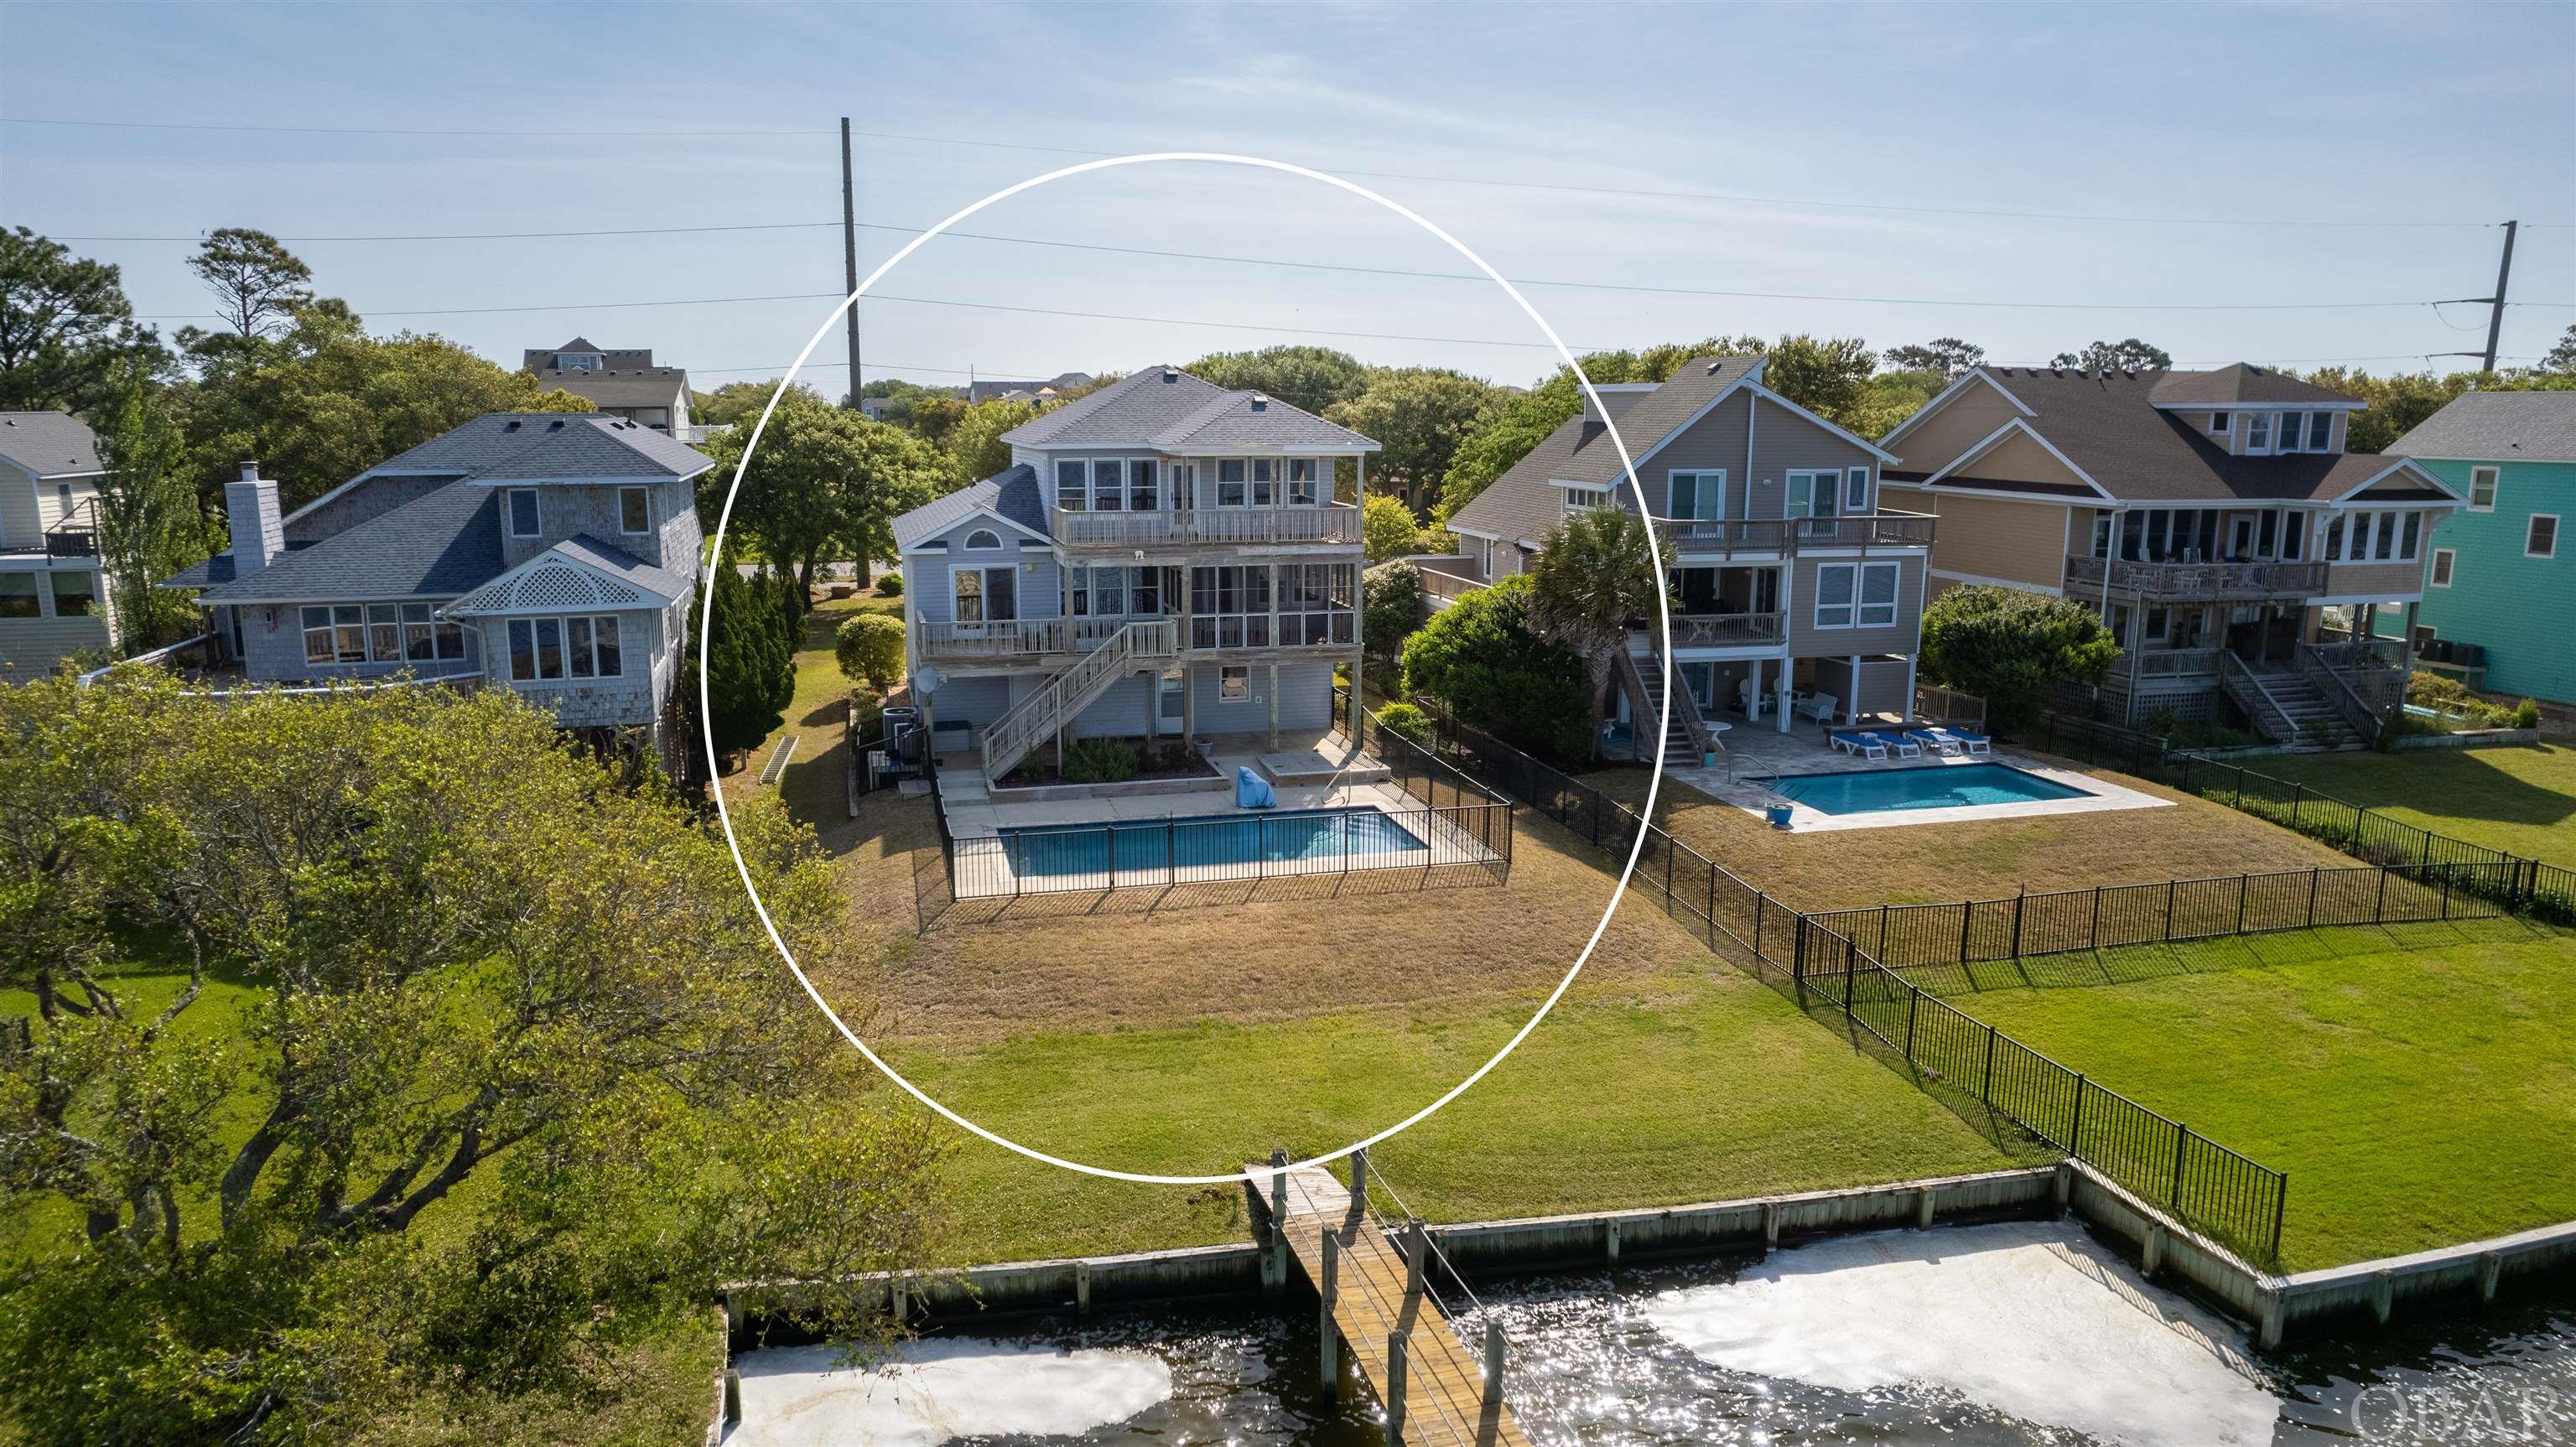 3142 Bay Drive, Kill Devil Hills, NC 27949, 4 Bedrooms Bedrooms, ,3 BathroomsBathrooms,Residential,For sale,Bay Drive,125607